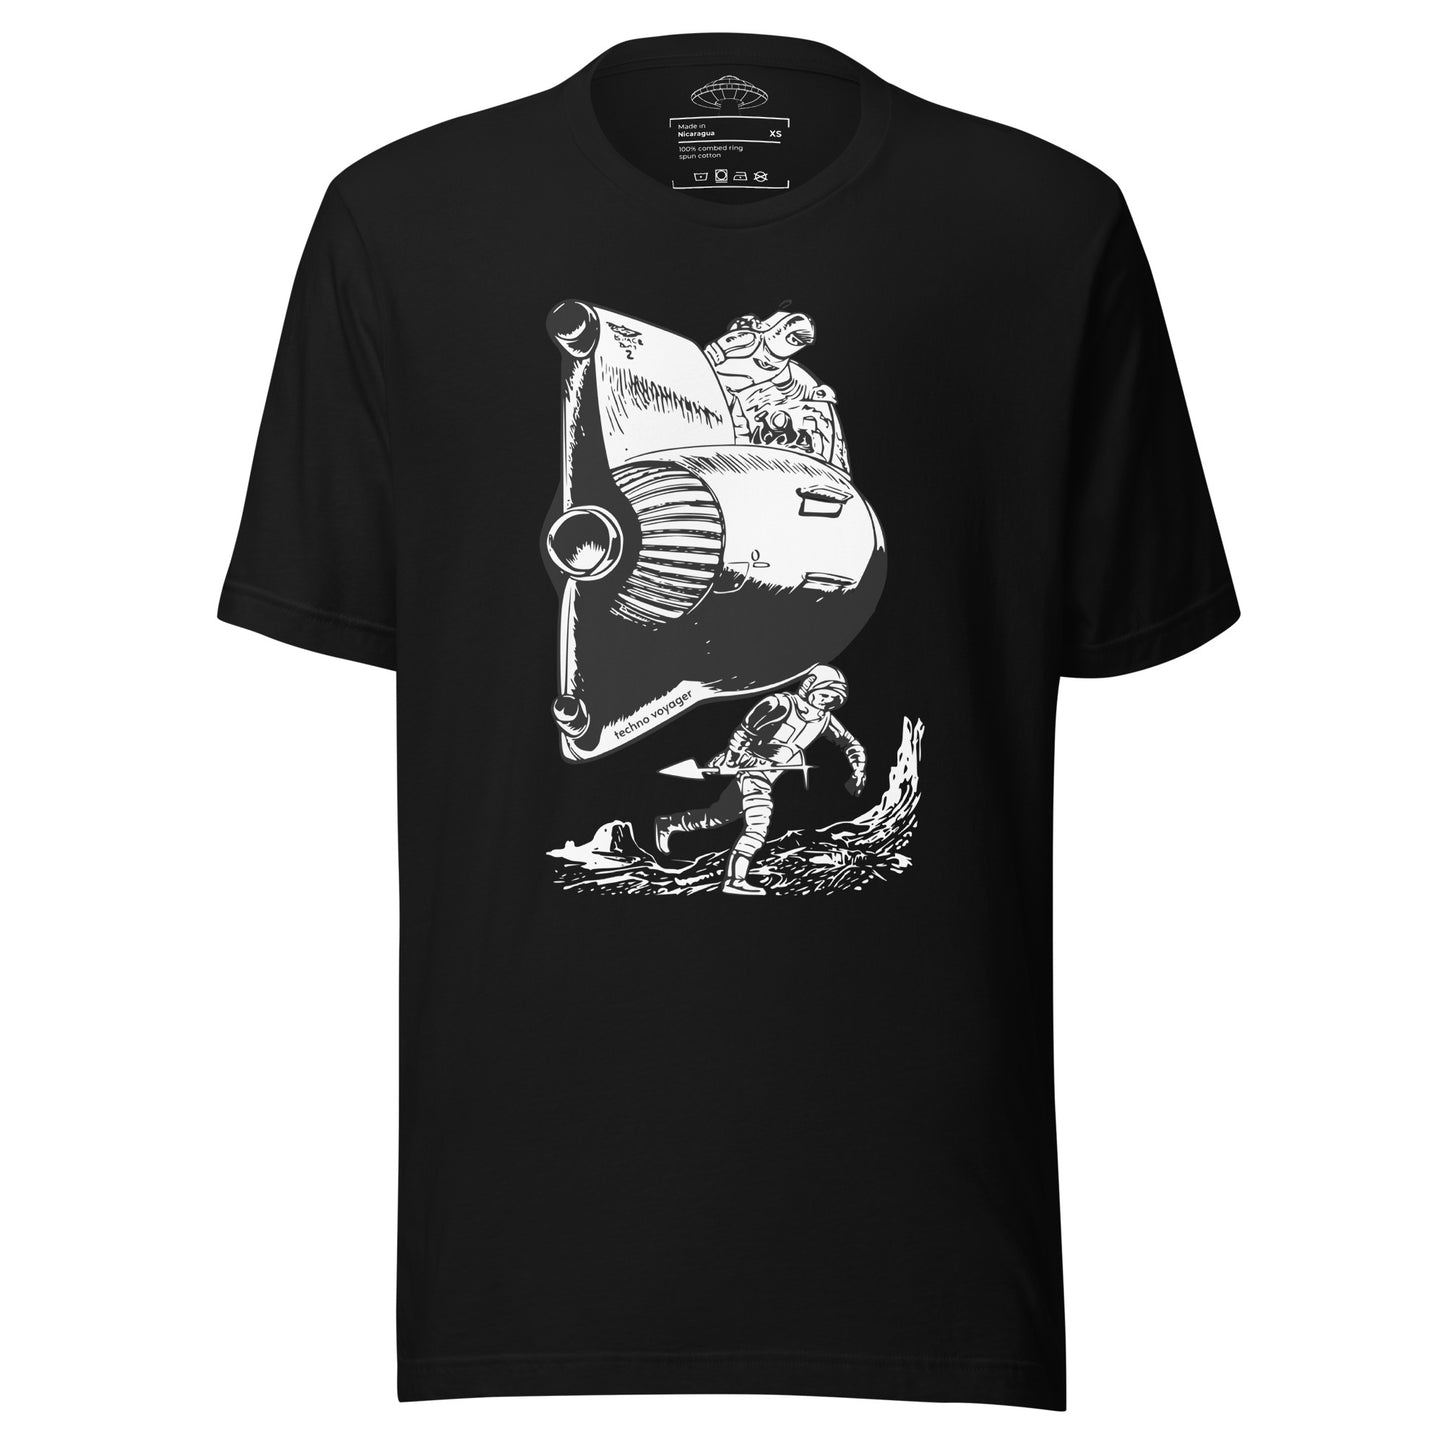 'MIND-EXPEDITION' T-Shirt